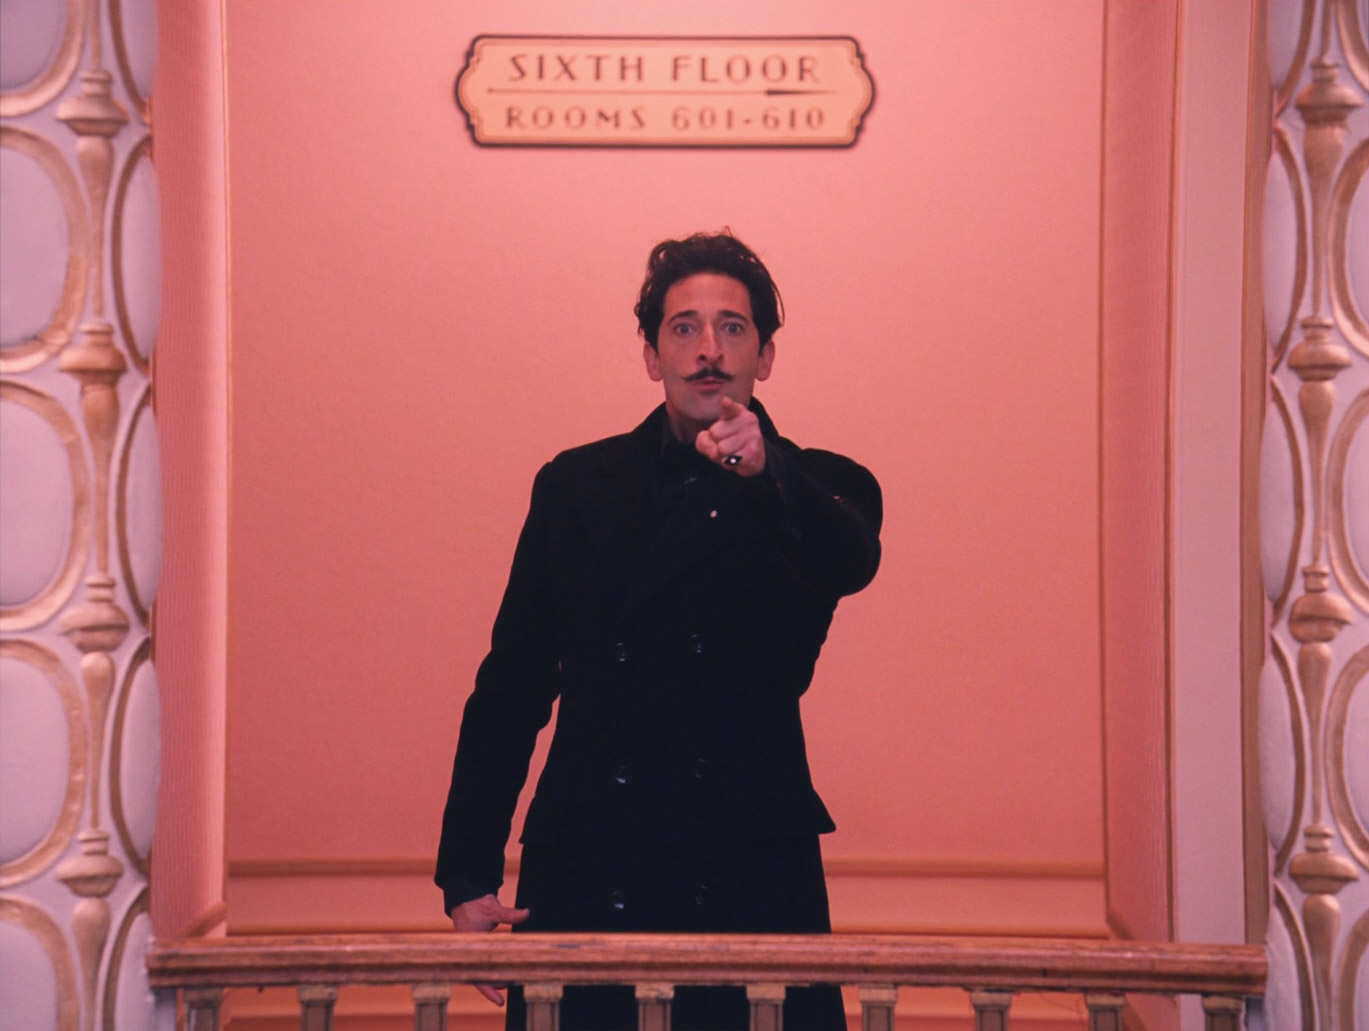 Adrien Brody in The Grand Budapest Hotel